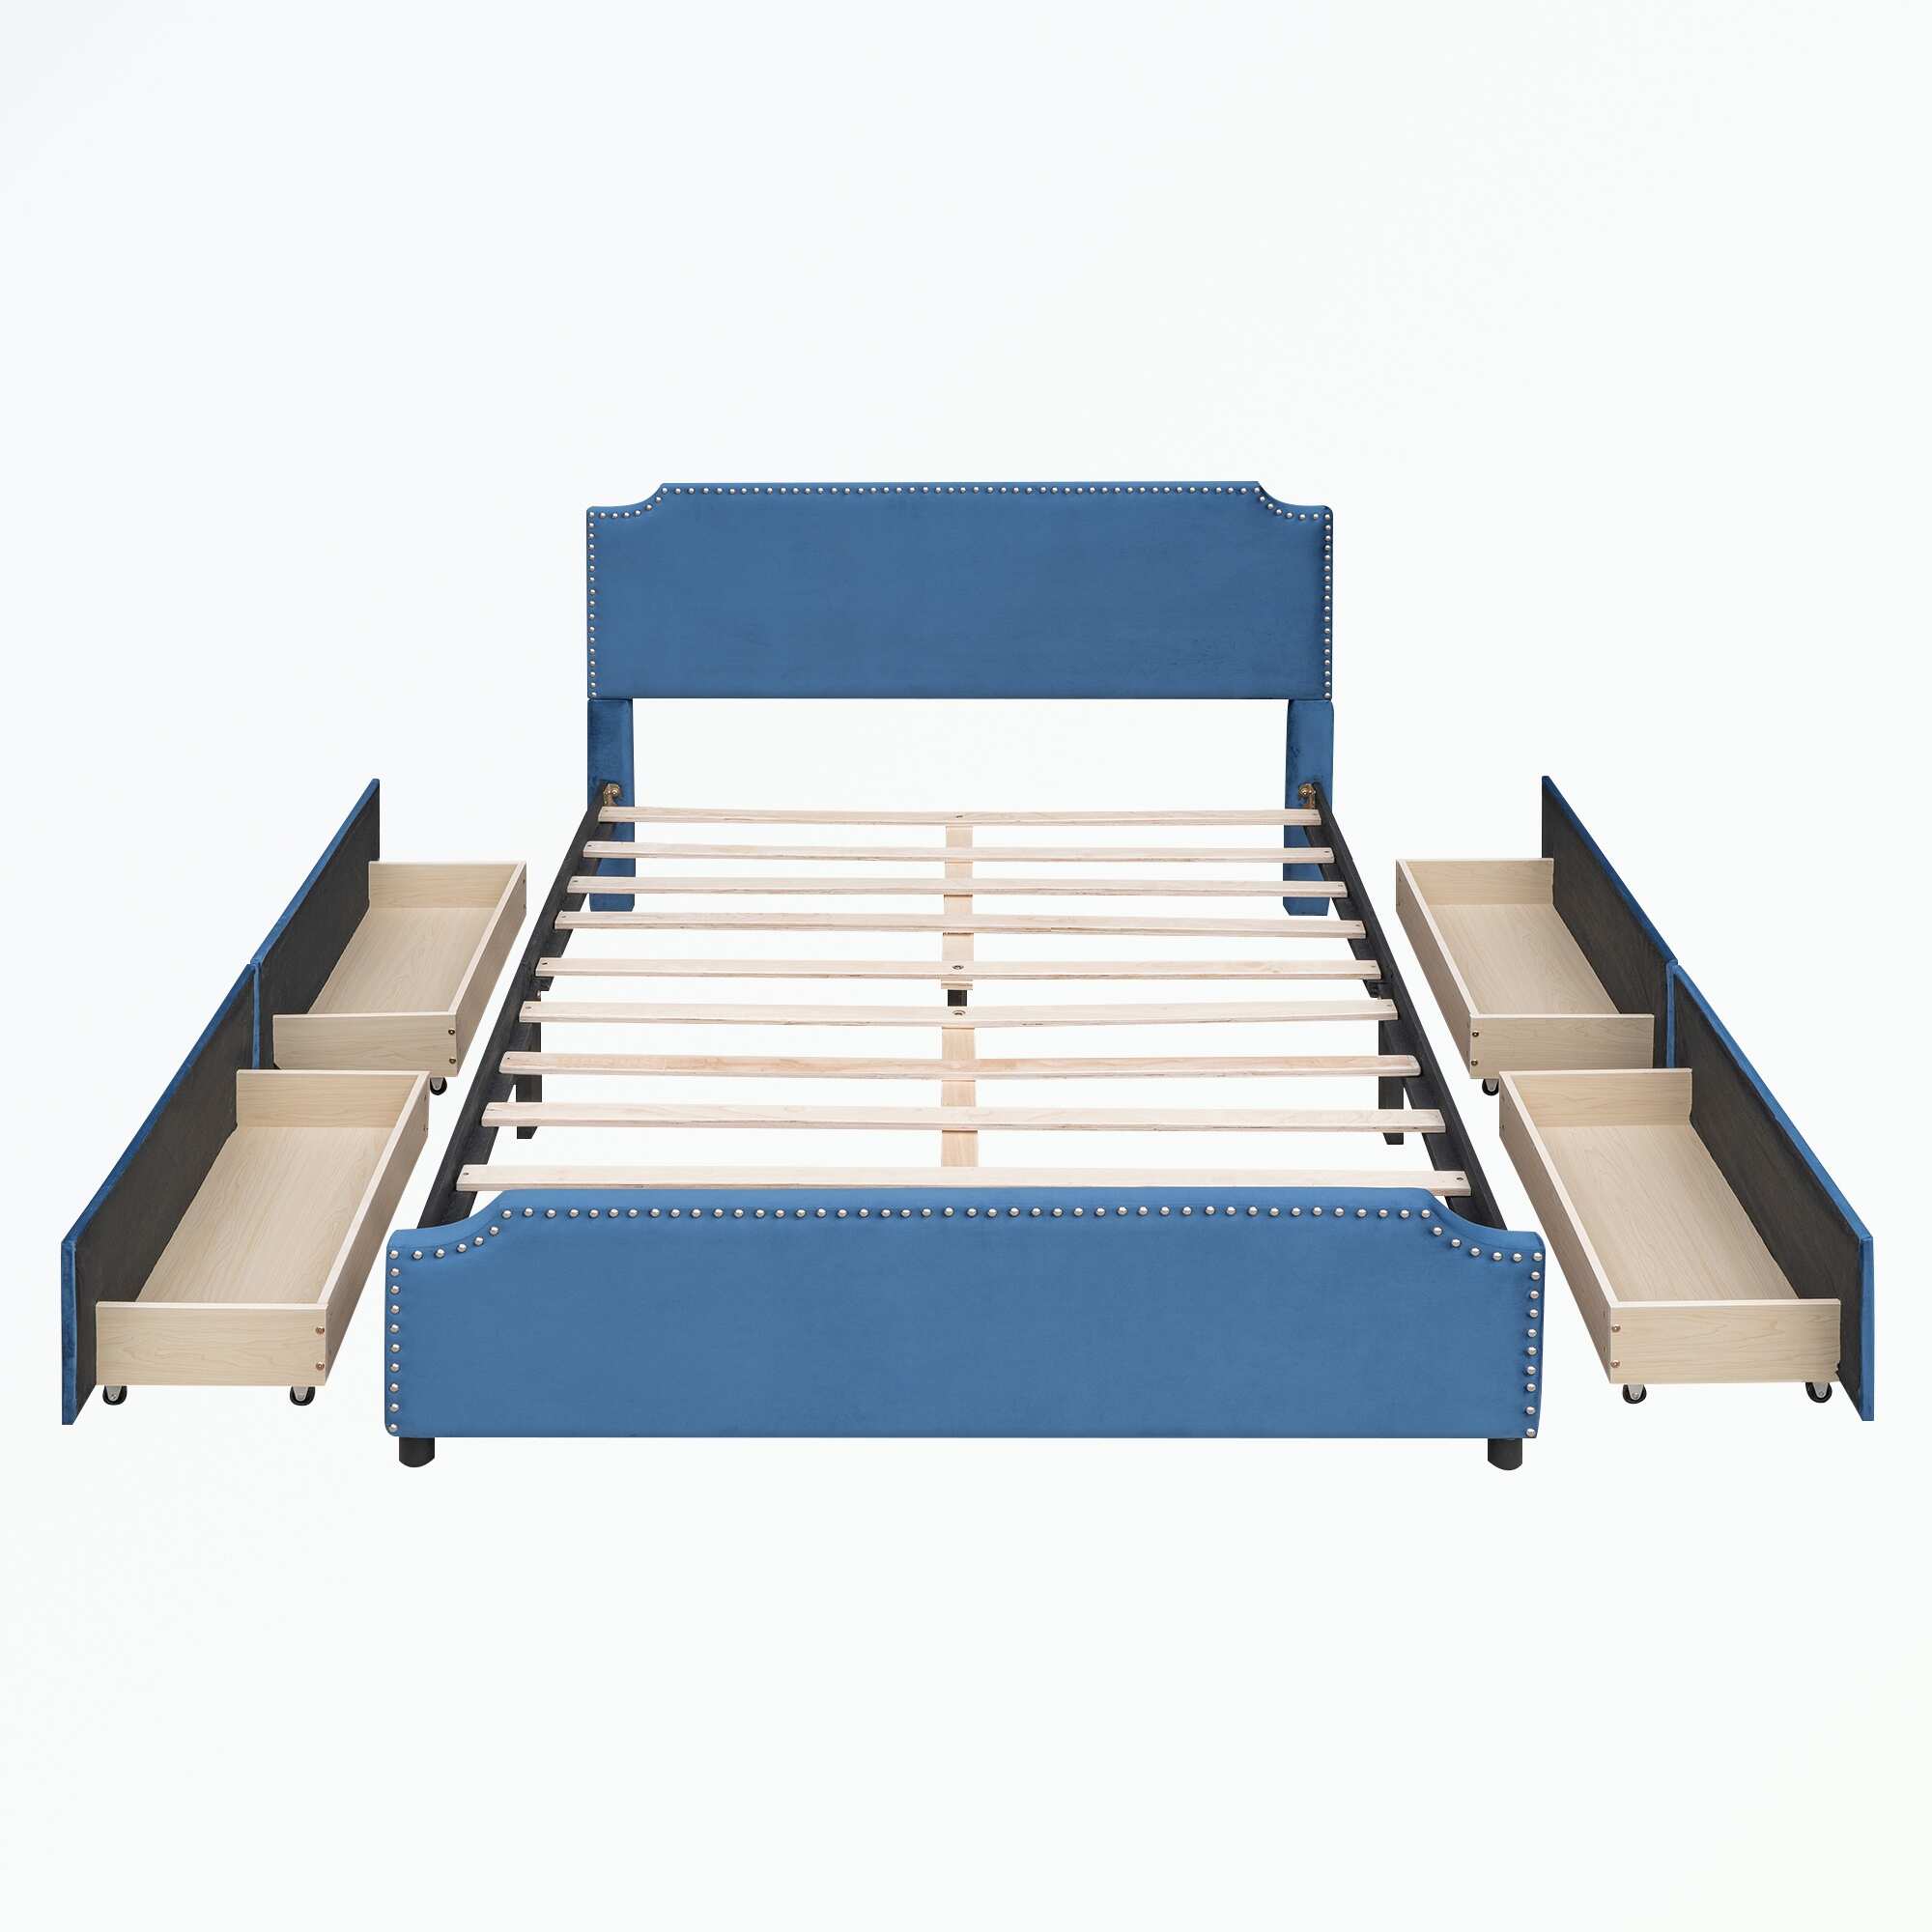 Upholstered Platform Bed with Stud Trim Headboard and Footboard